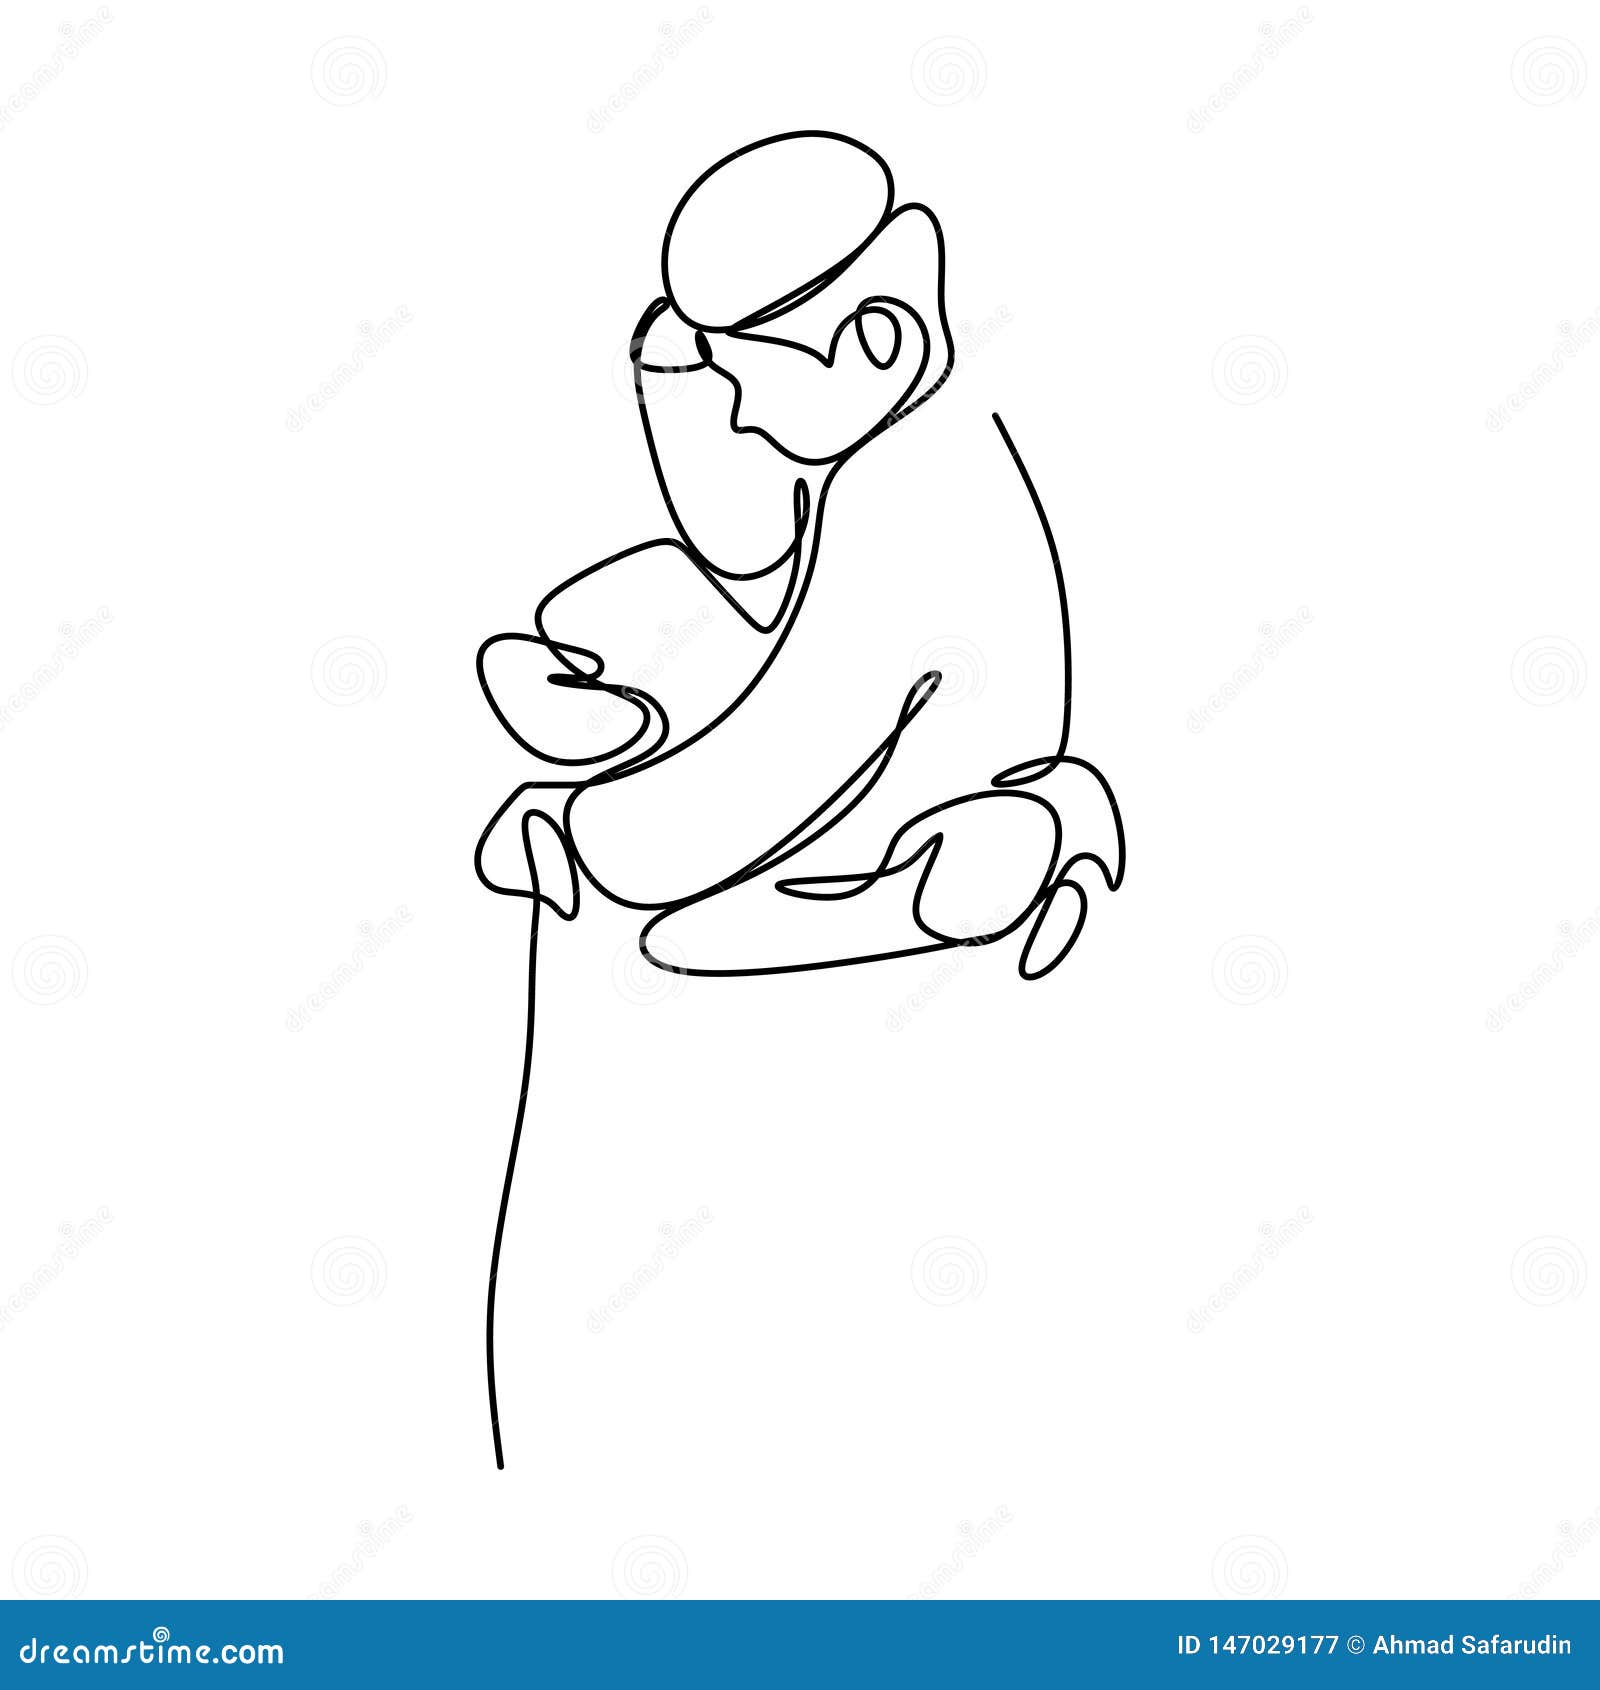 people-hug-continuous-line-drawing-147029177.jpg